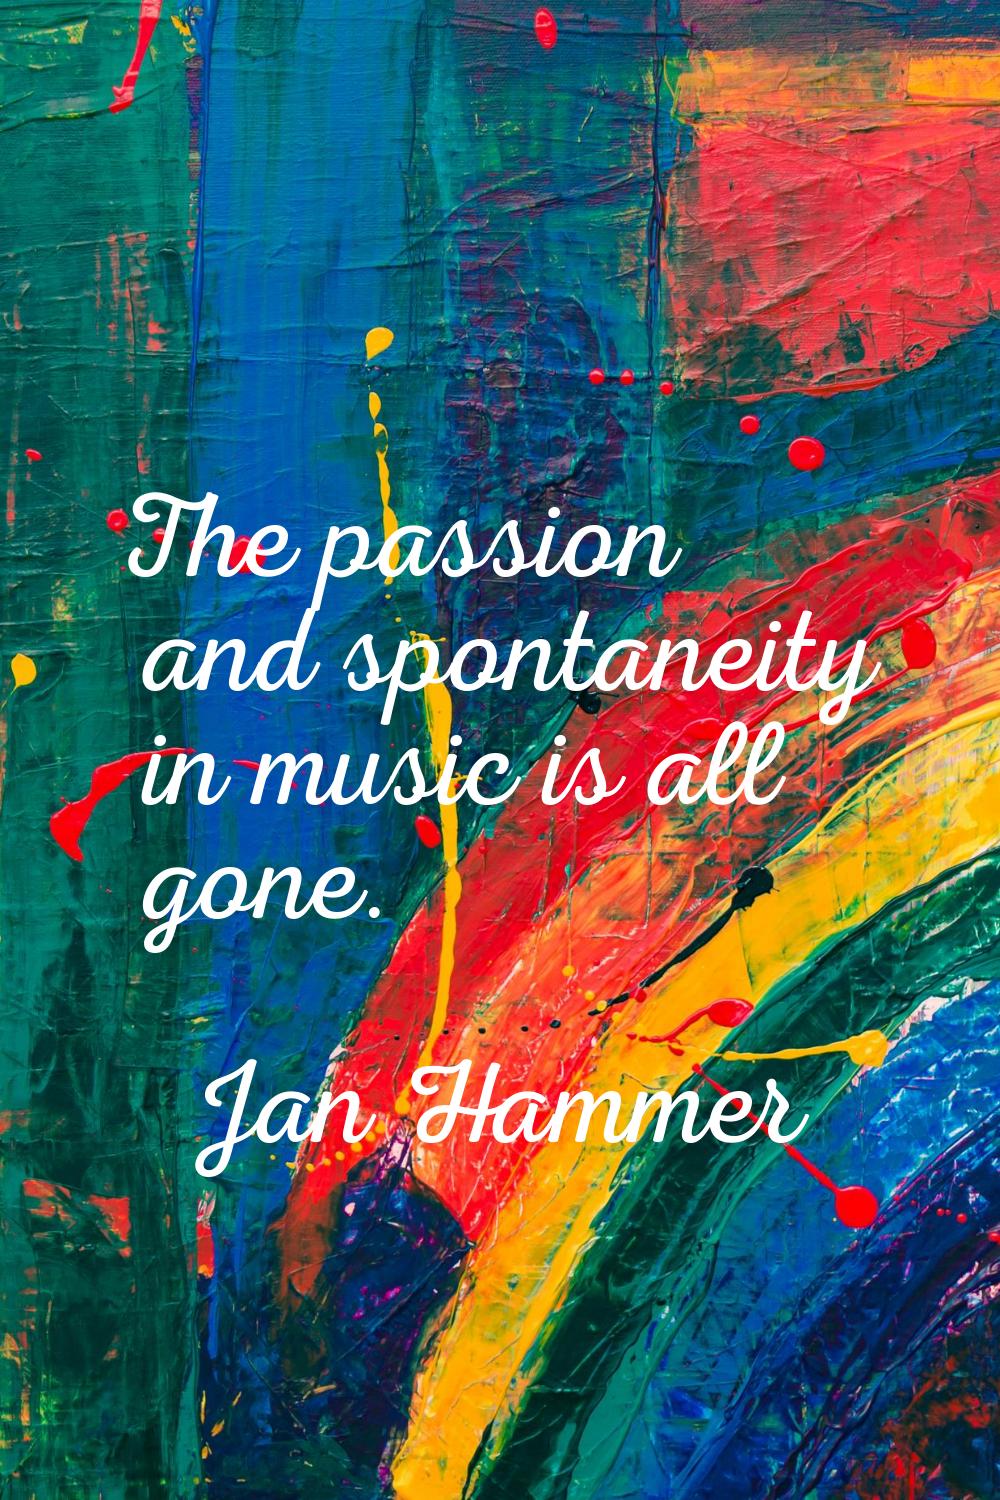 The passion and spontaneity in music is all gone.